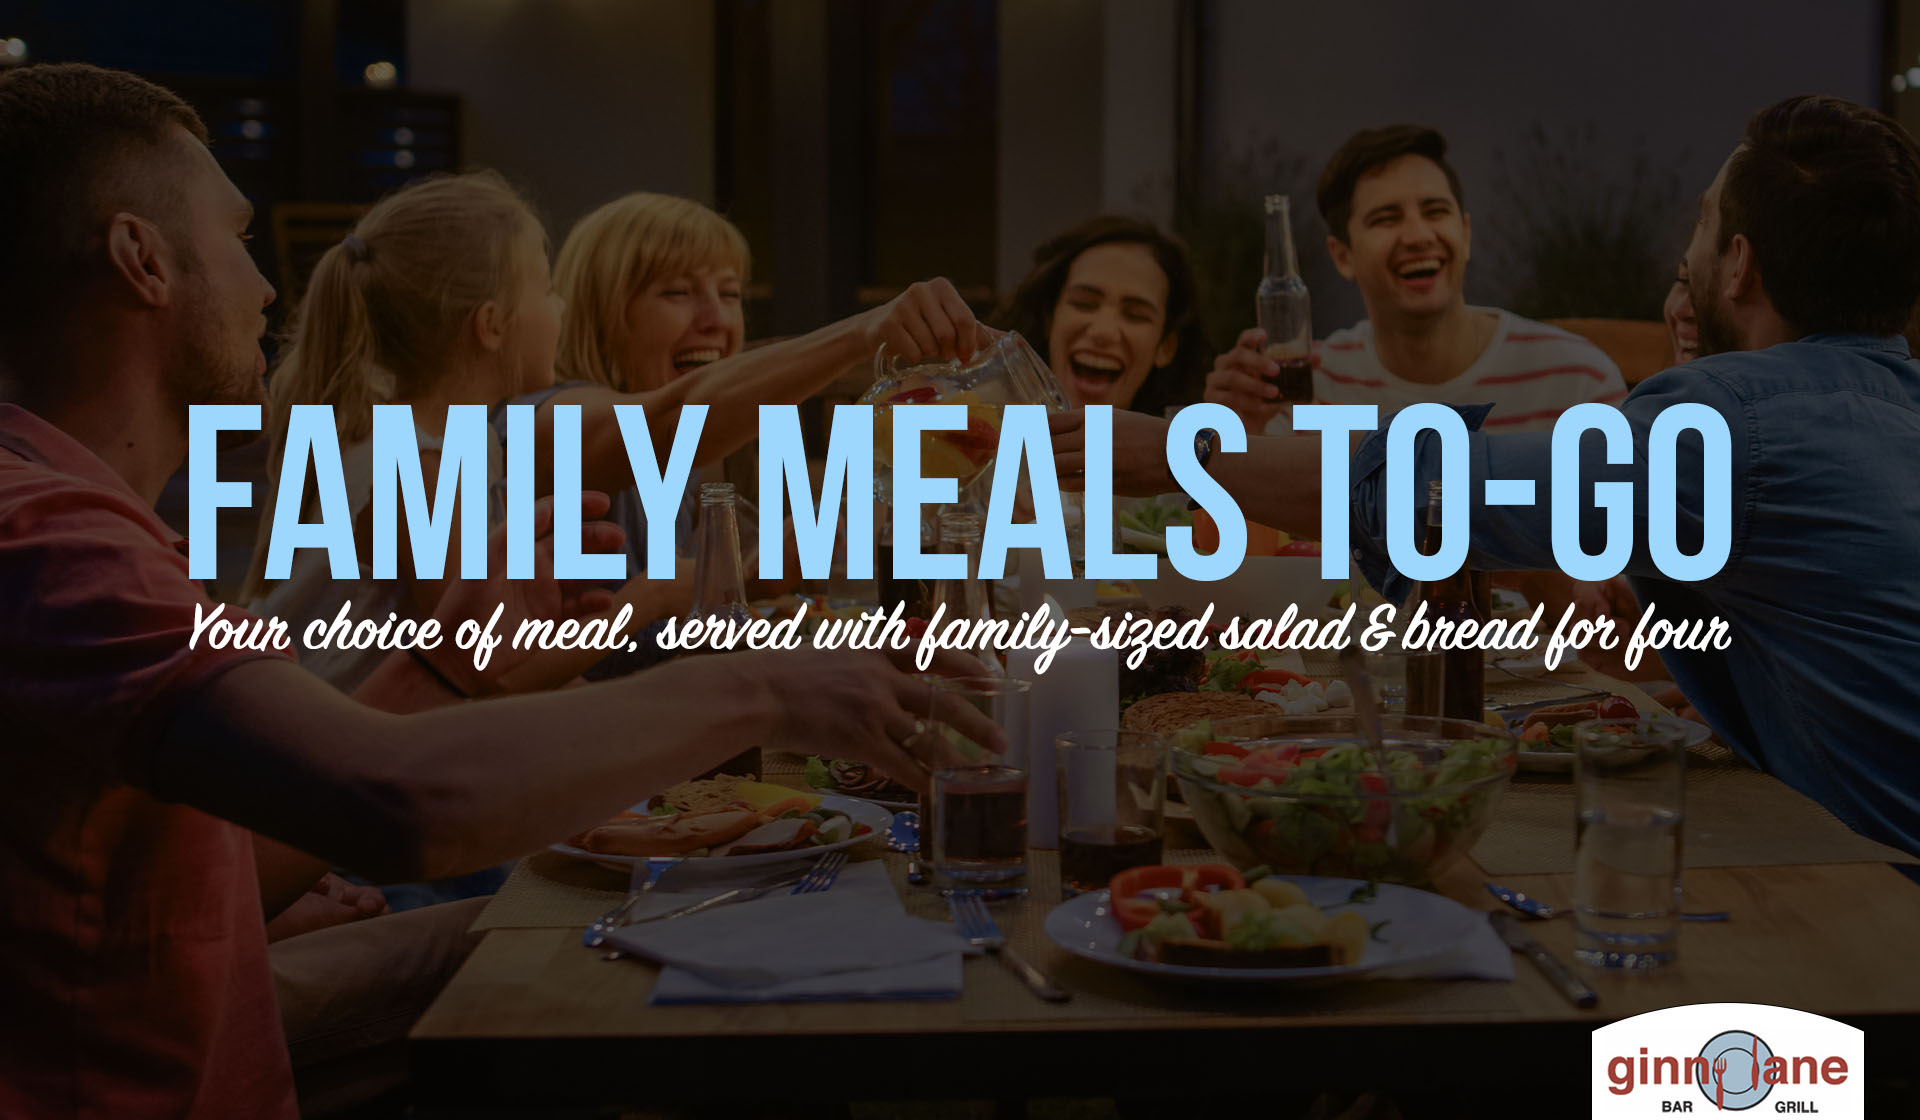 Ginny Lane Grille Family Meals, Takeout in Orange Beach, Al